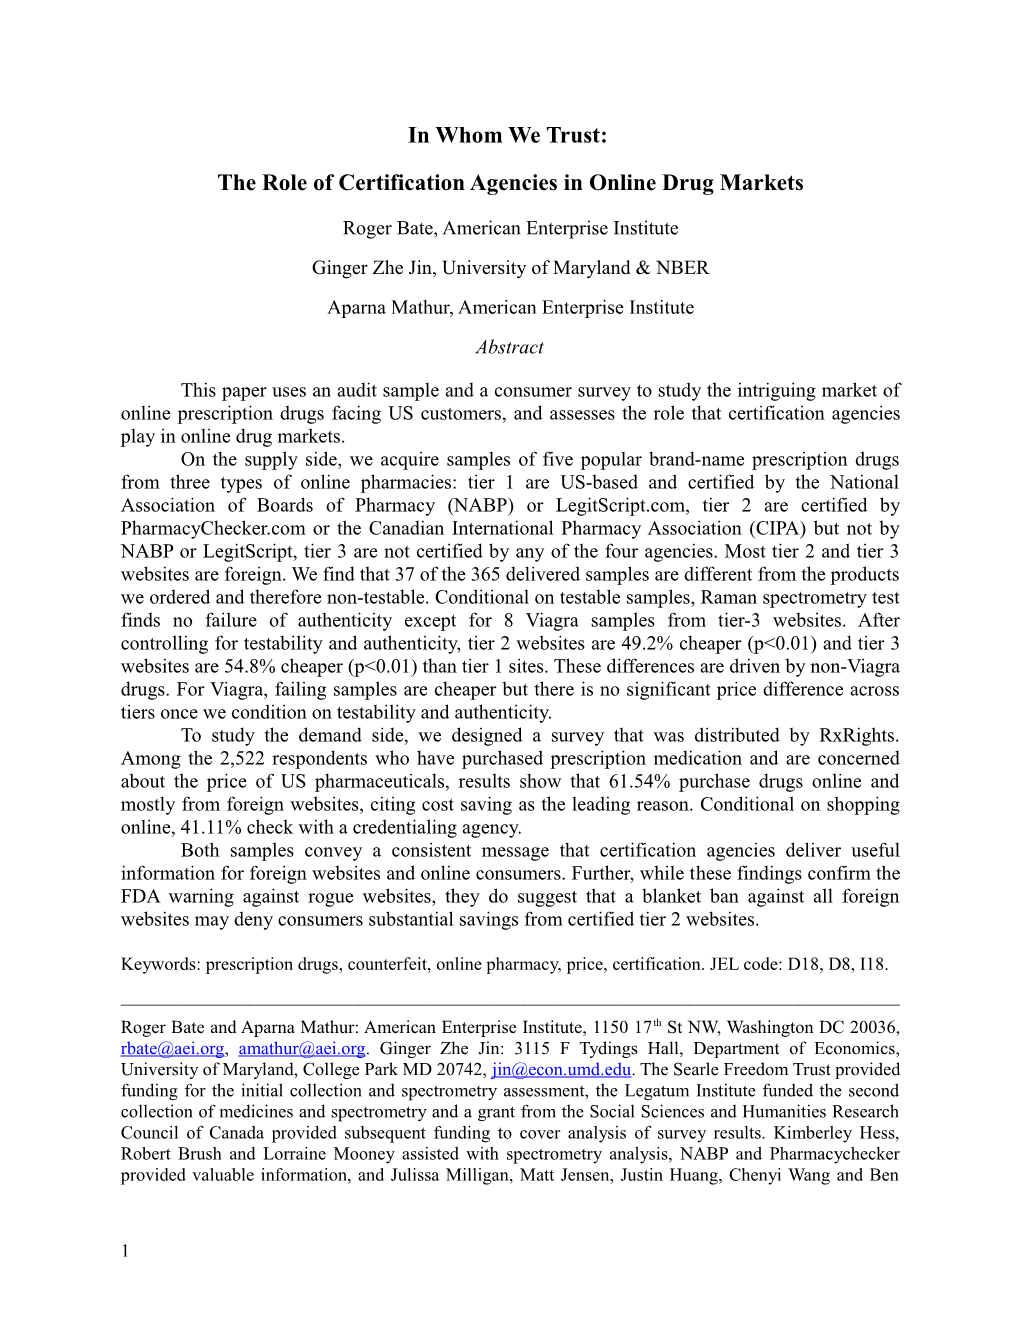 The Role of Certification Agencies in Online Drug Markets